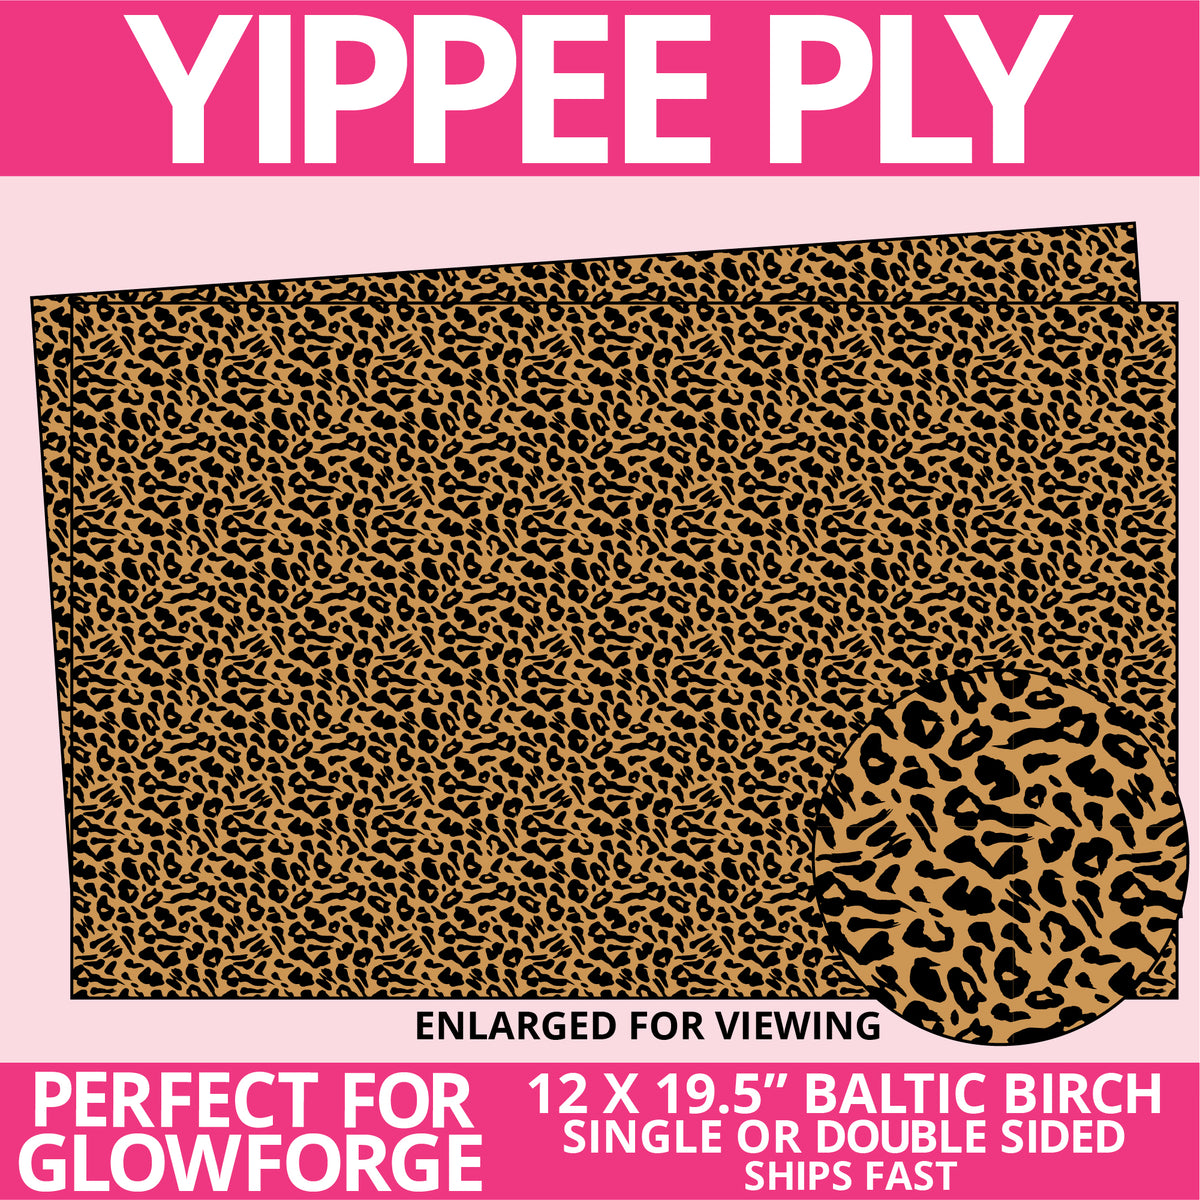 Yippee Ply Leopard Pattern on Birch Plywood 1035